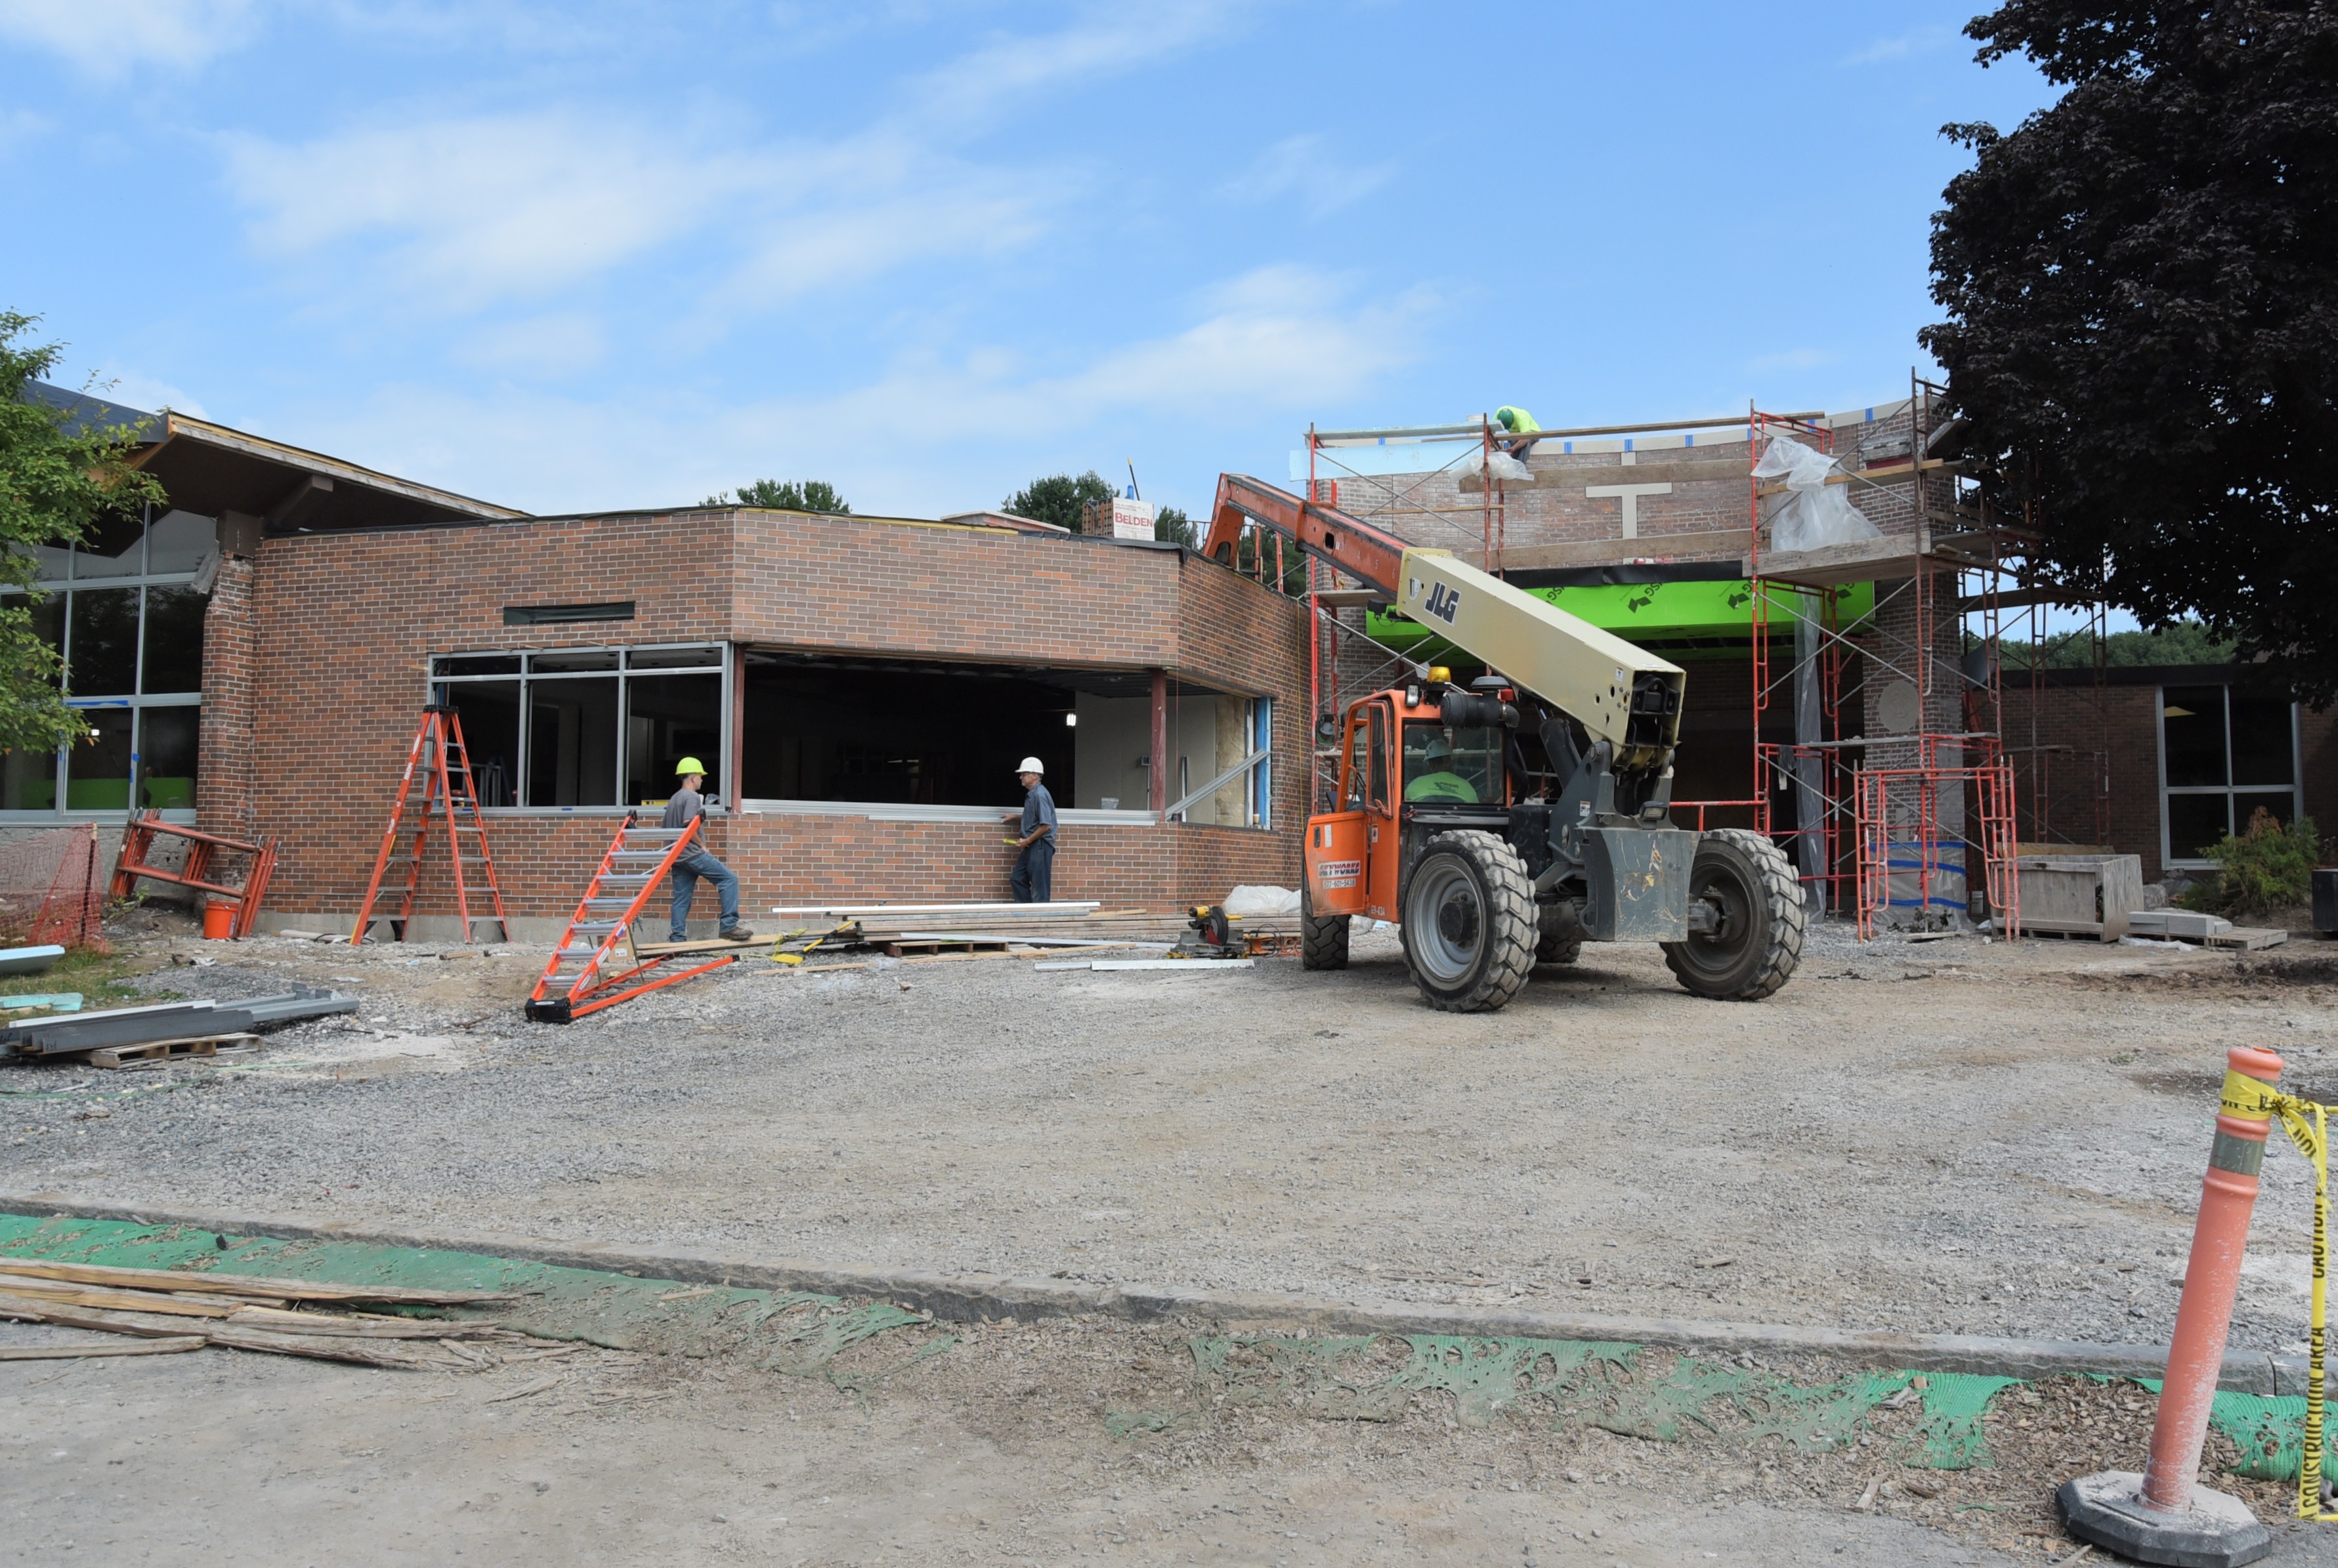 Front of school during construction (shot straight on far away)